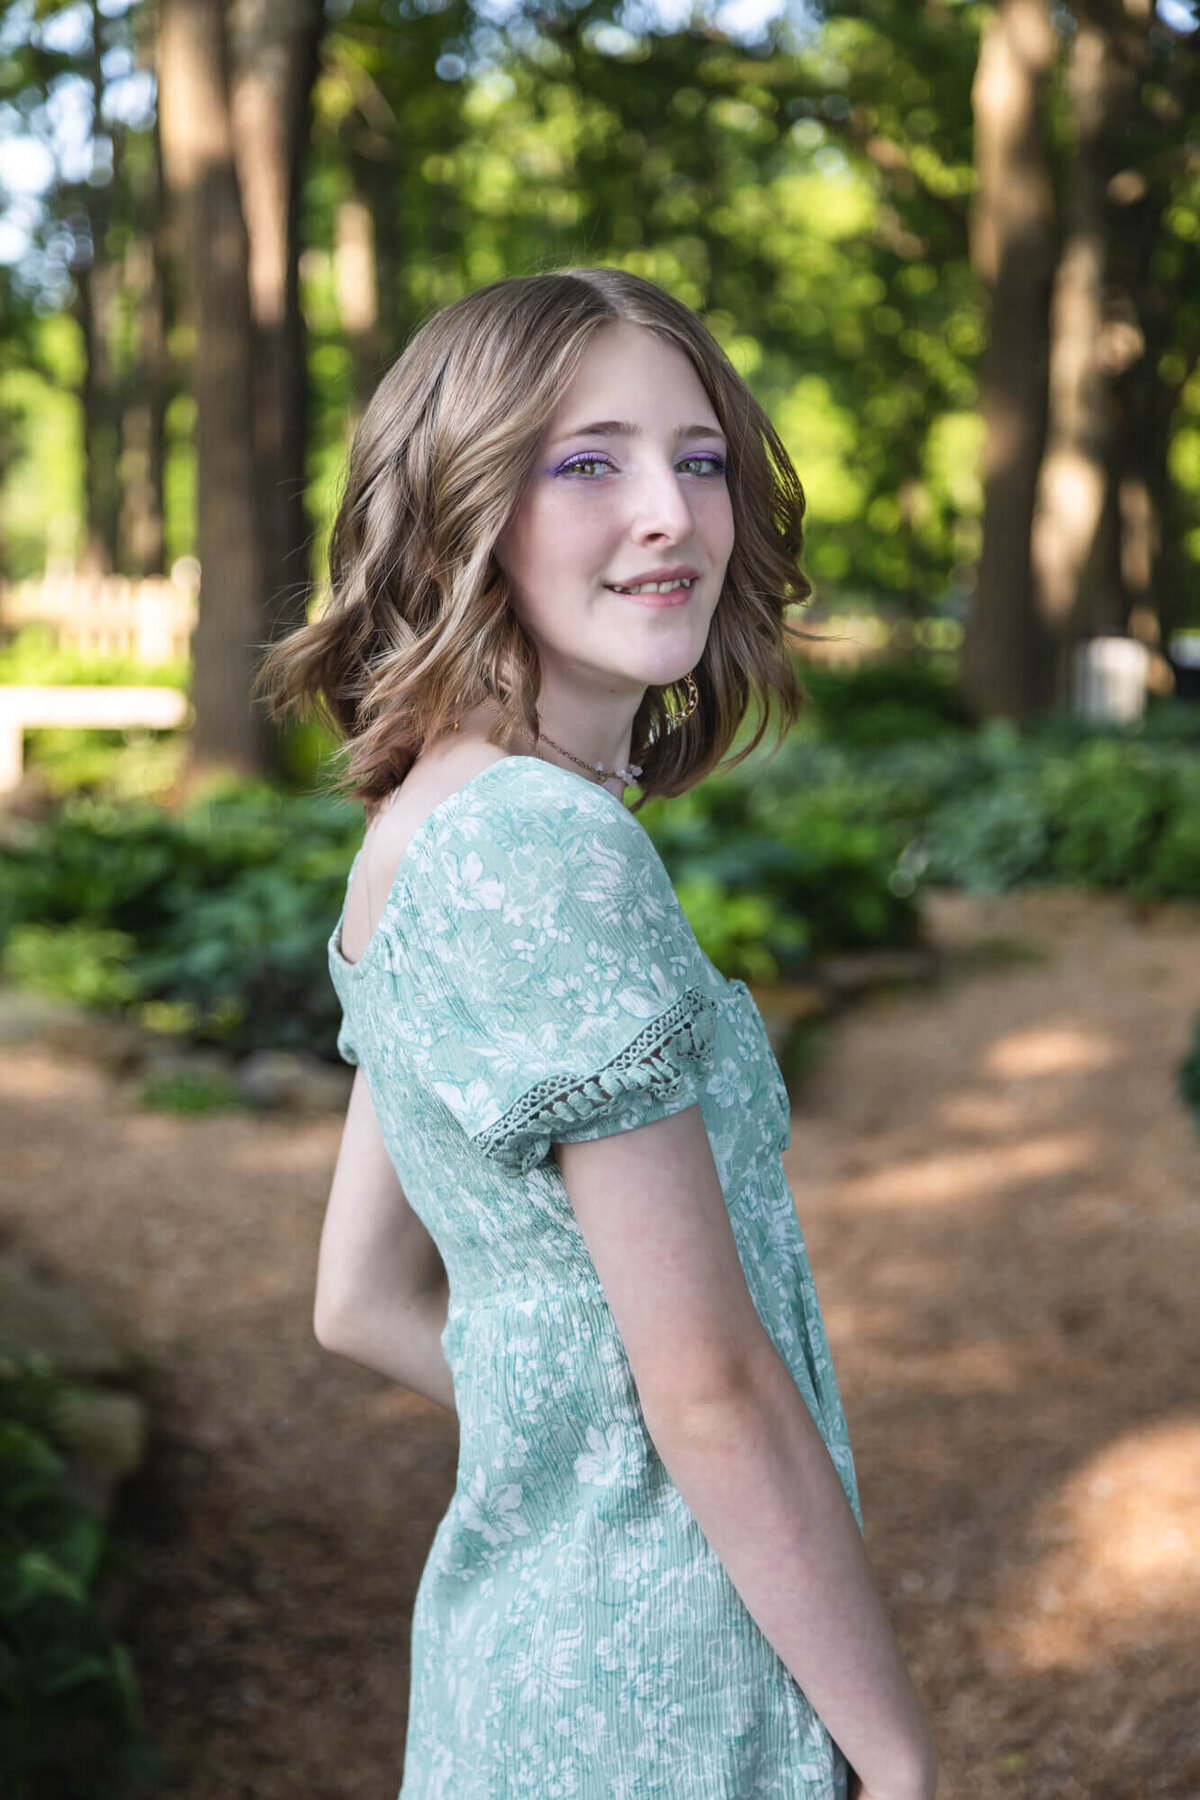 Pretty blonde teen girl wearing a floral green dress looking over her shoulder in the park. Captured by Springfield, MO teen photographer Dynae Levingston.